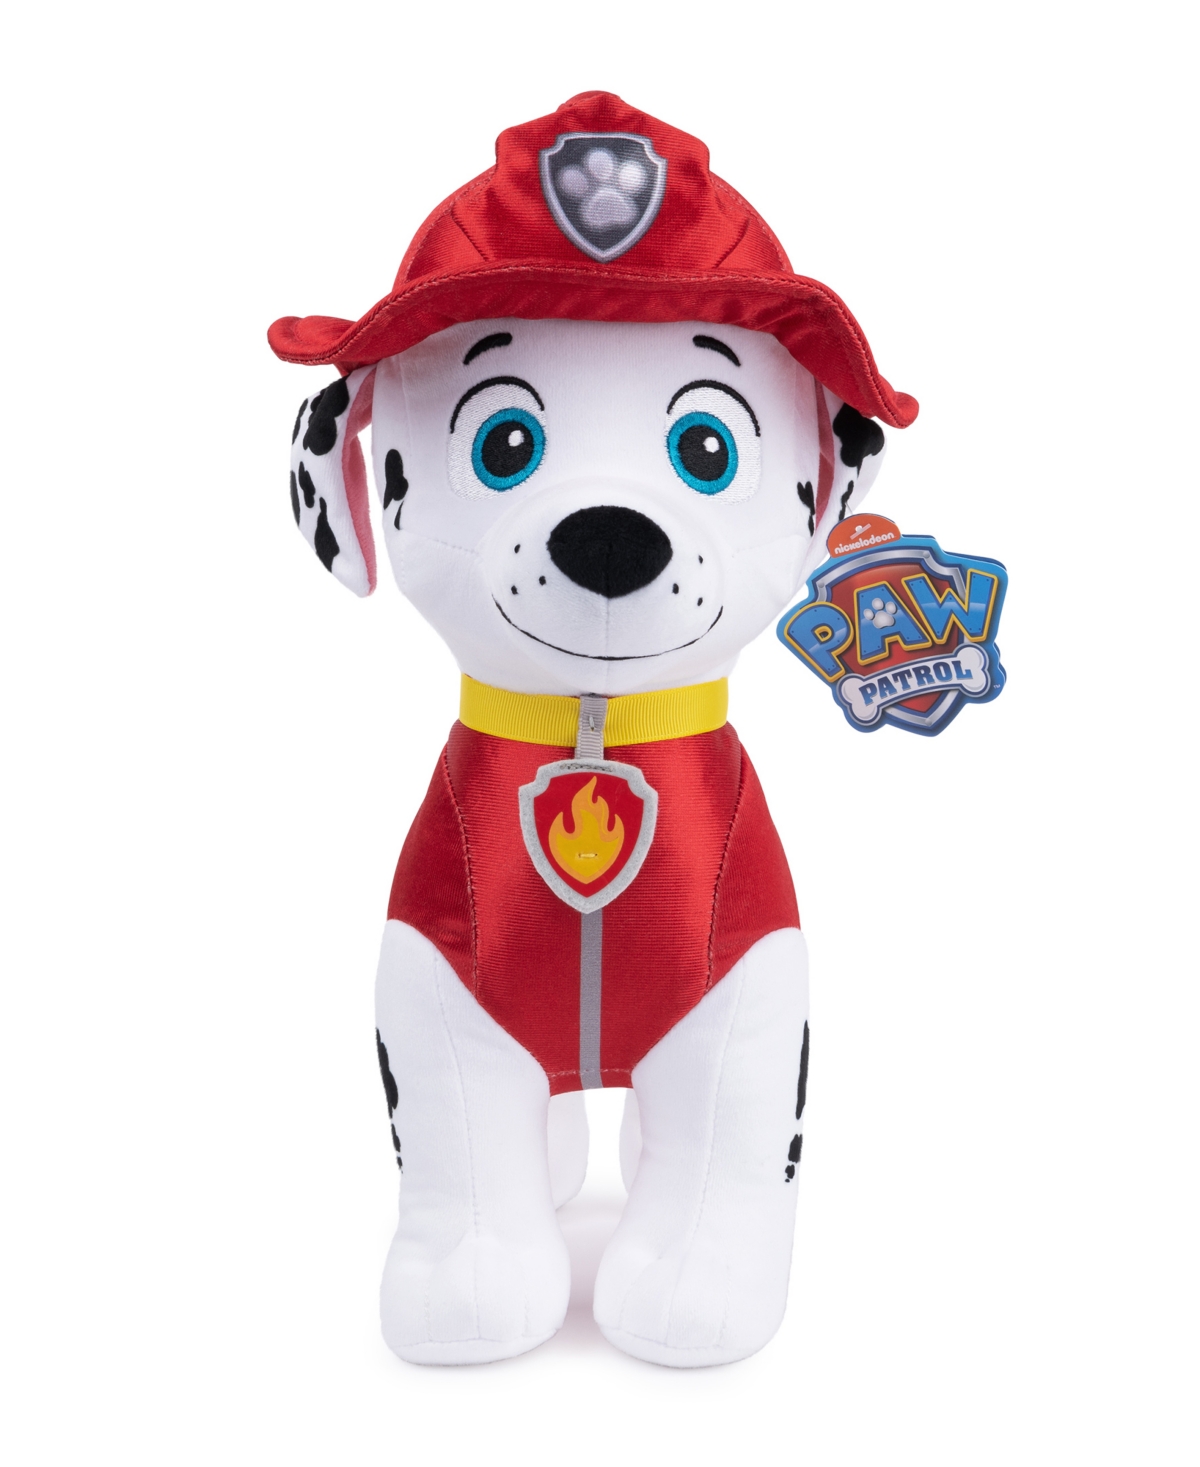 Paw Patrol Kids' Marshall In Heroic Standing Position Premium Stuffed Animal Plush Toy In Multi-color